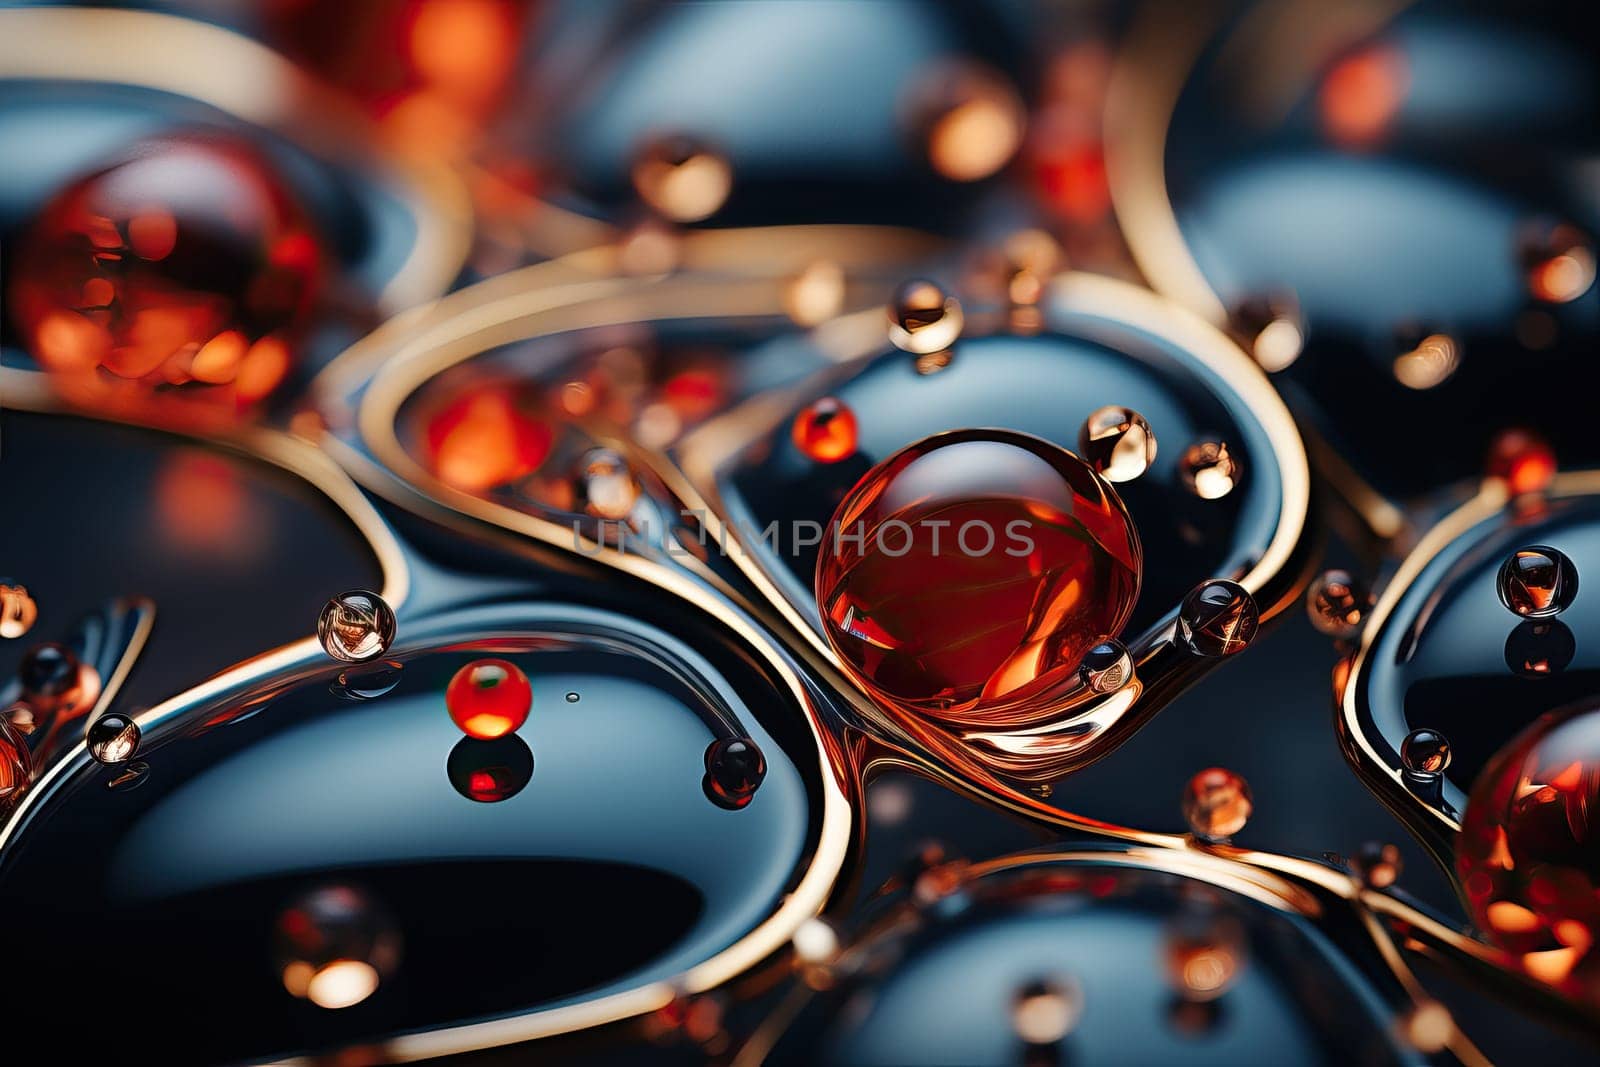 Abstract black background with red and yellow drops of different round shape, by Niko_Cingaryuk